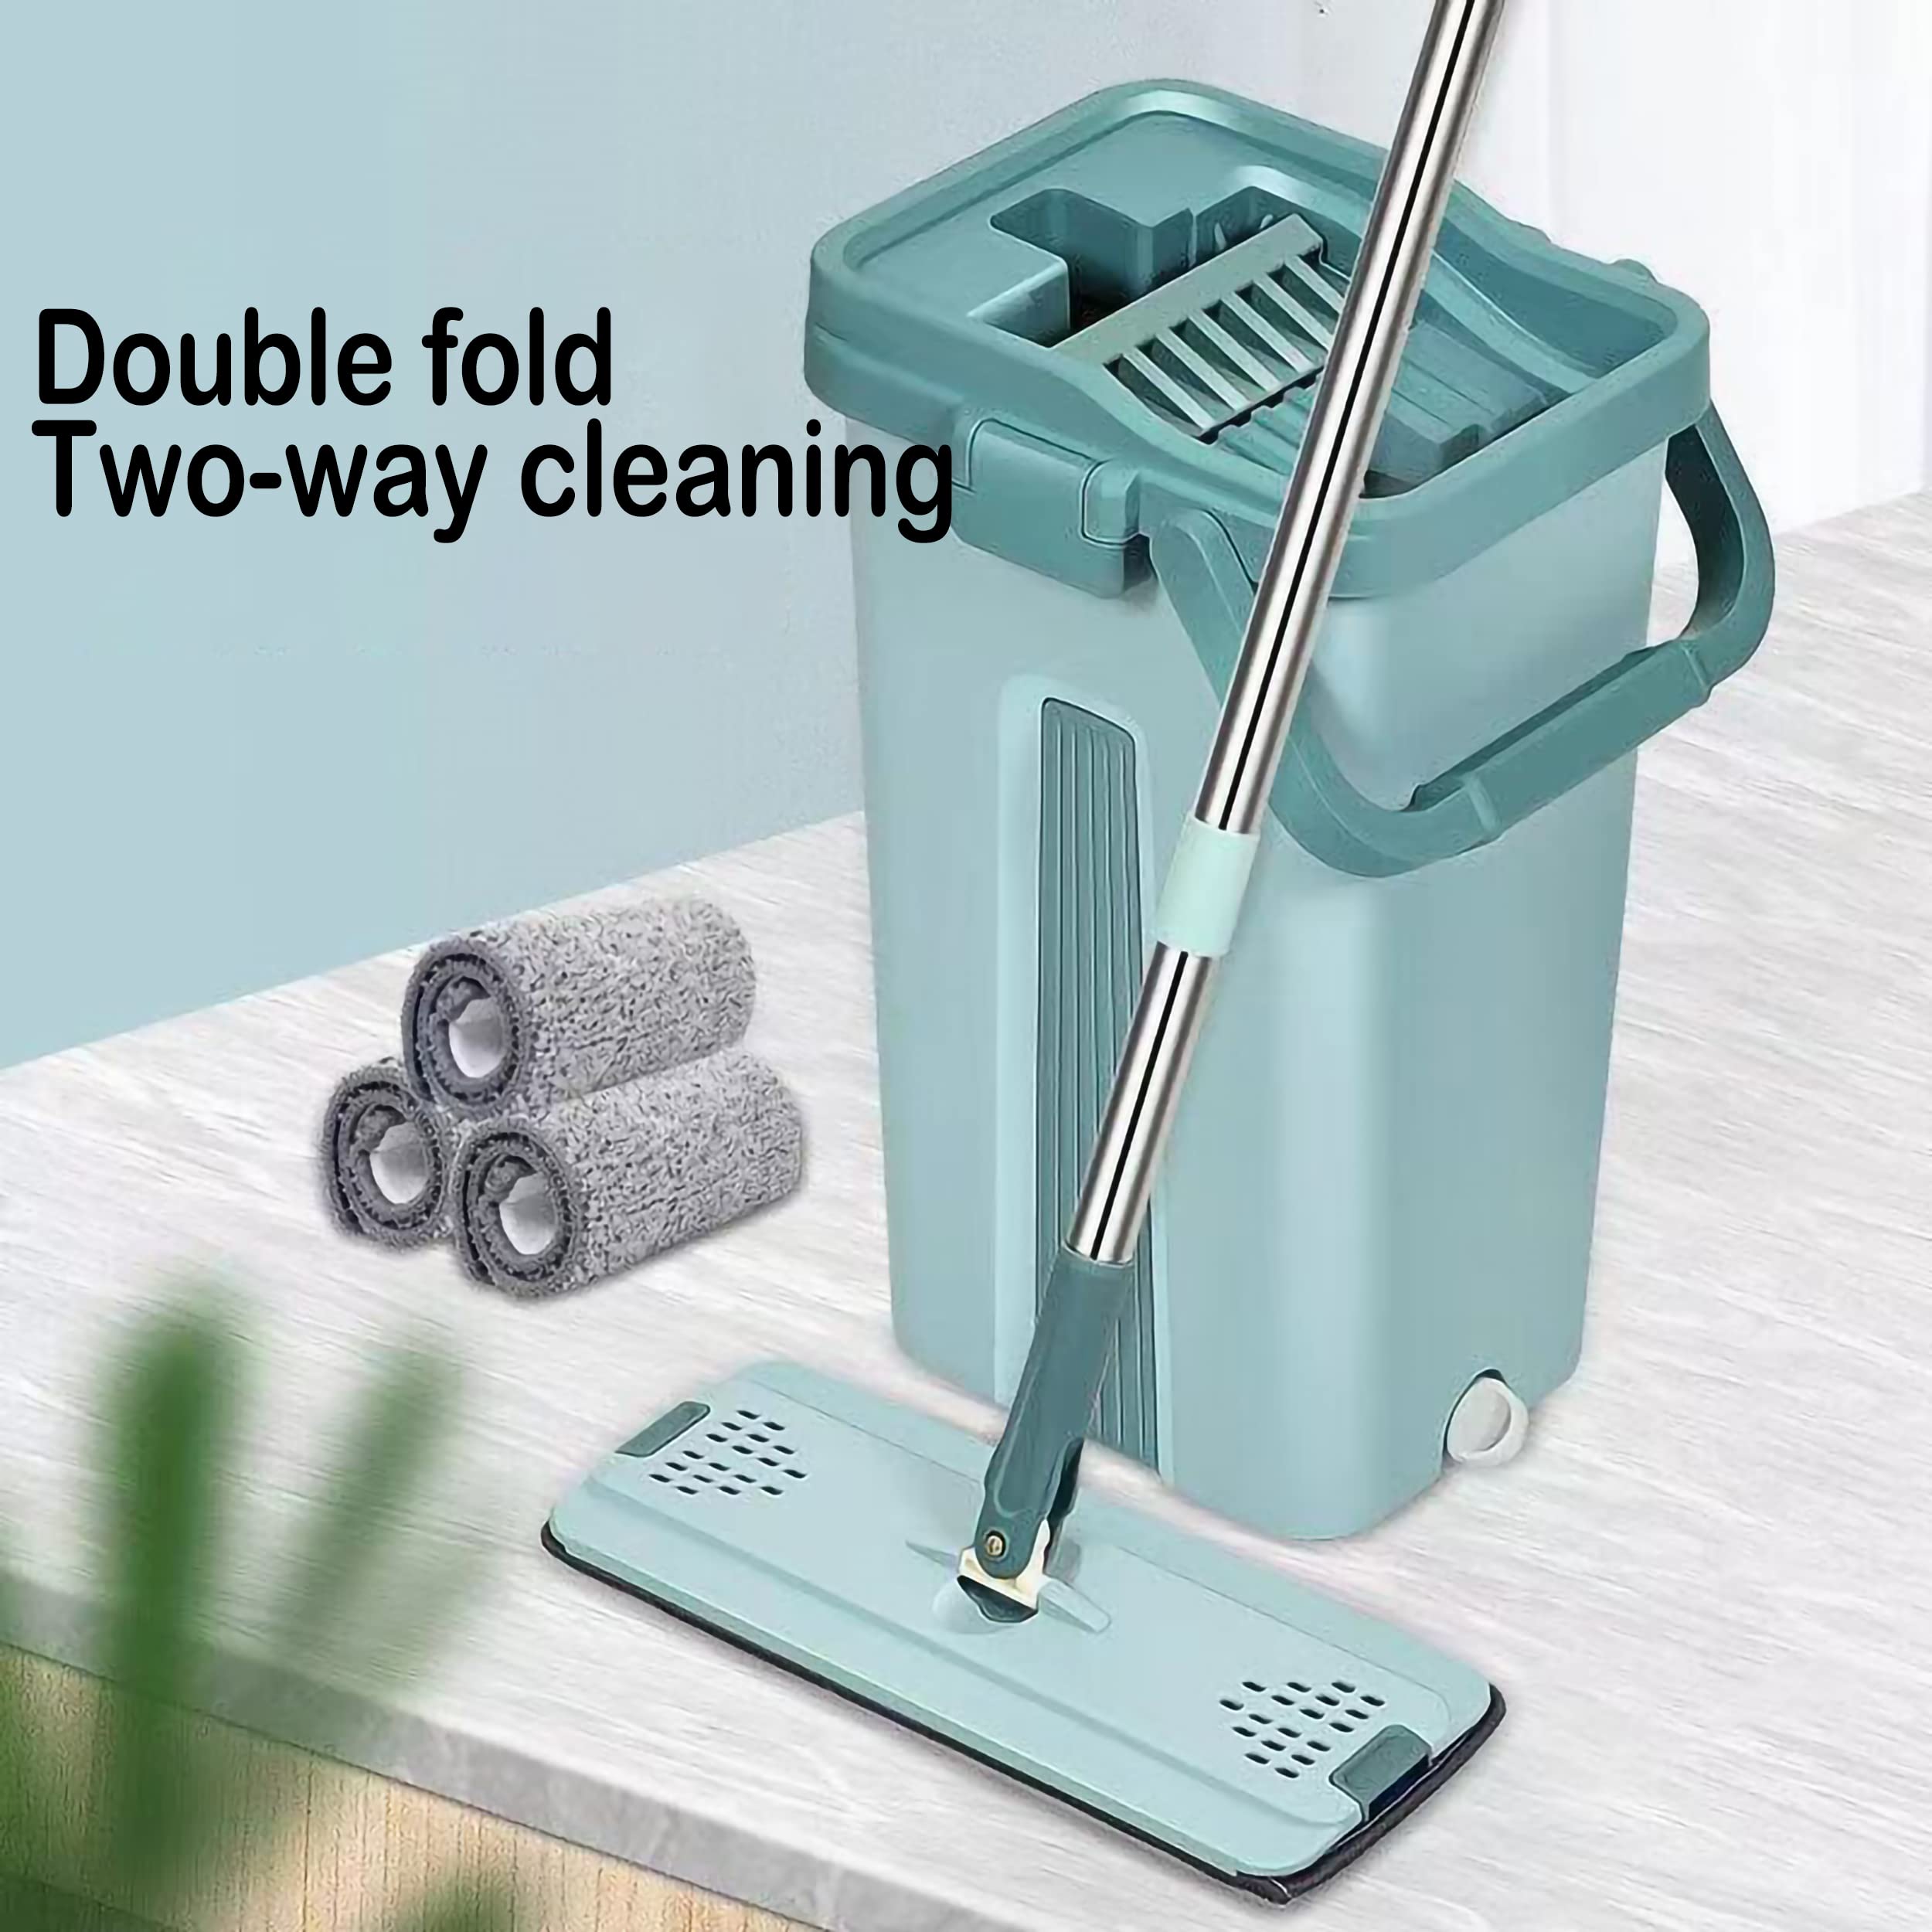 Dreamons Link Microfiber Flat Mop with Bucket, Cleaning Squeeze Hand Free Floor Mop, 3 Reusable Mop Pads, Stainless Steel Handle,360° Rotating Head Squeeze Flat Mop